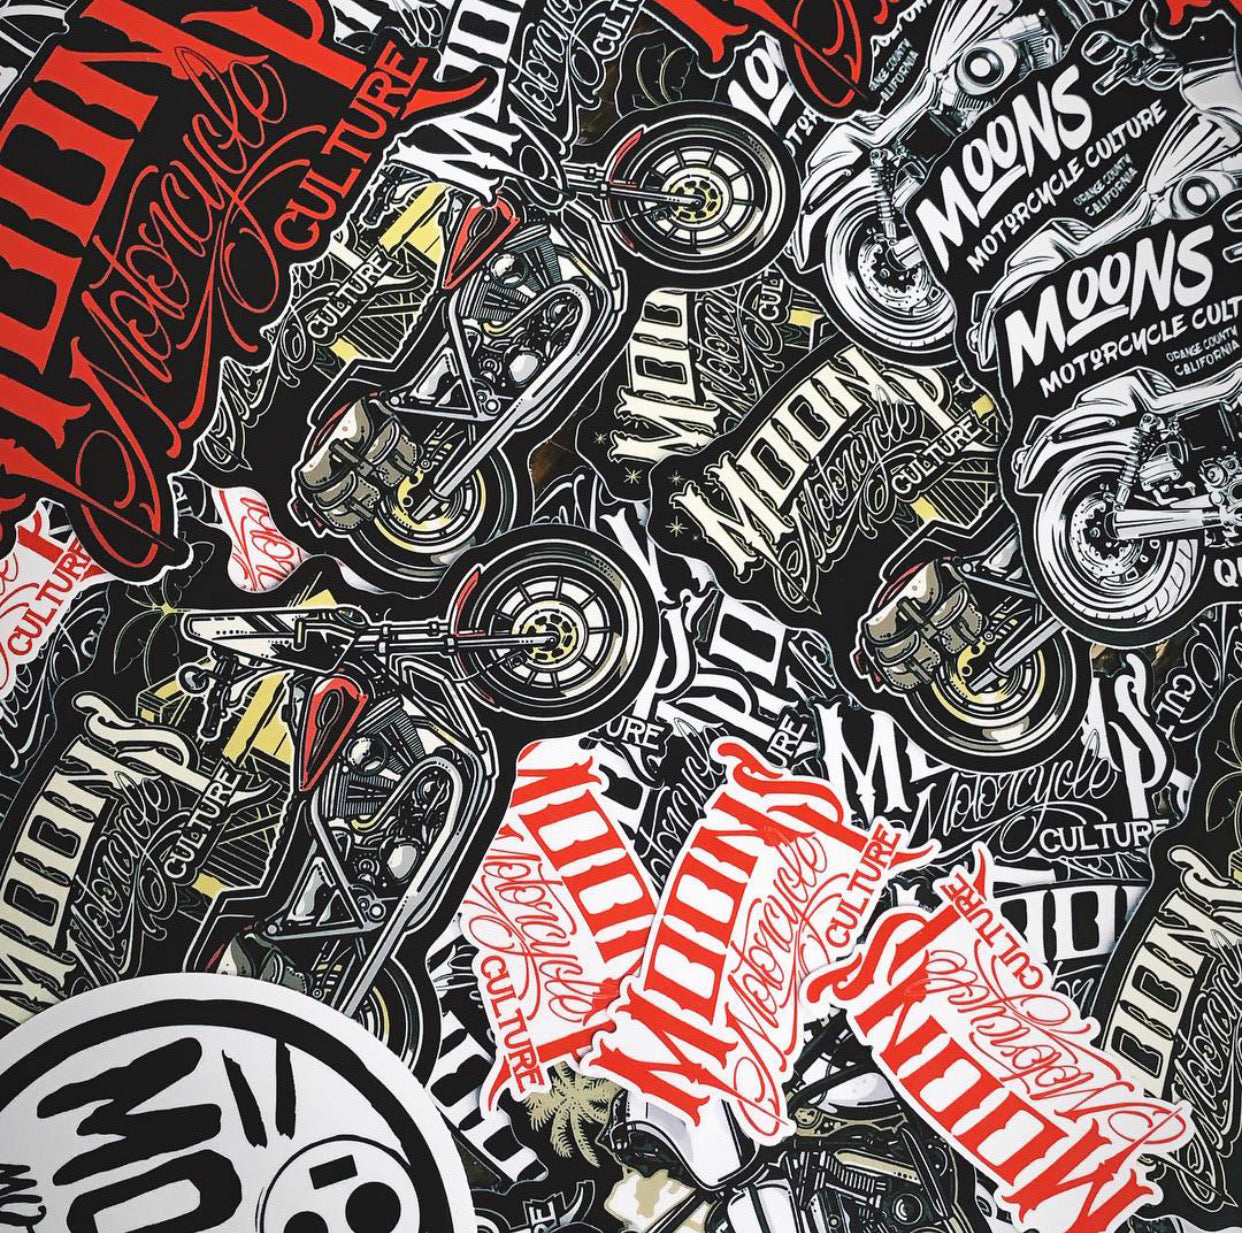 MOONSMC® Die Cut Sticker Pack, Stickers, MOONS, MOONSMC® // Moons Motorcycle Culture